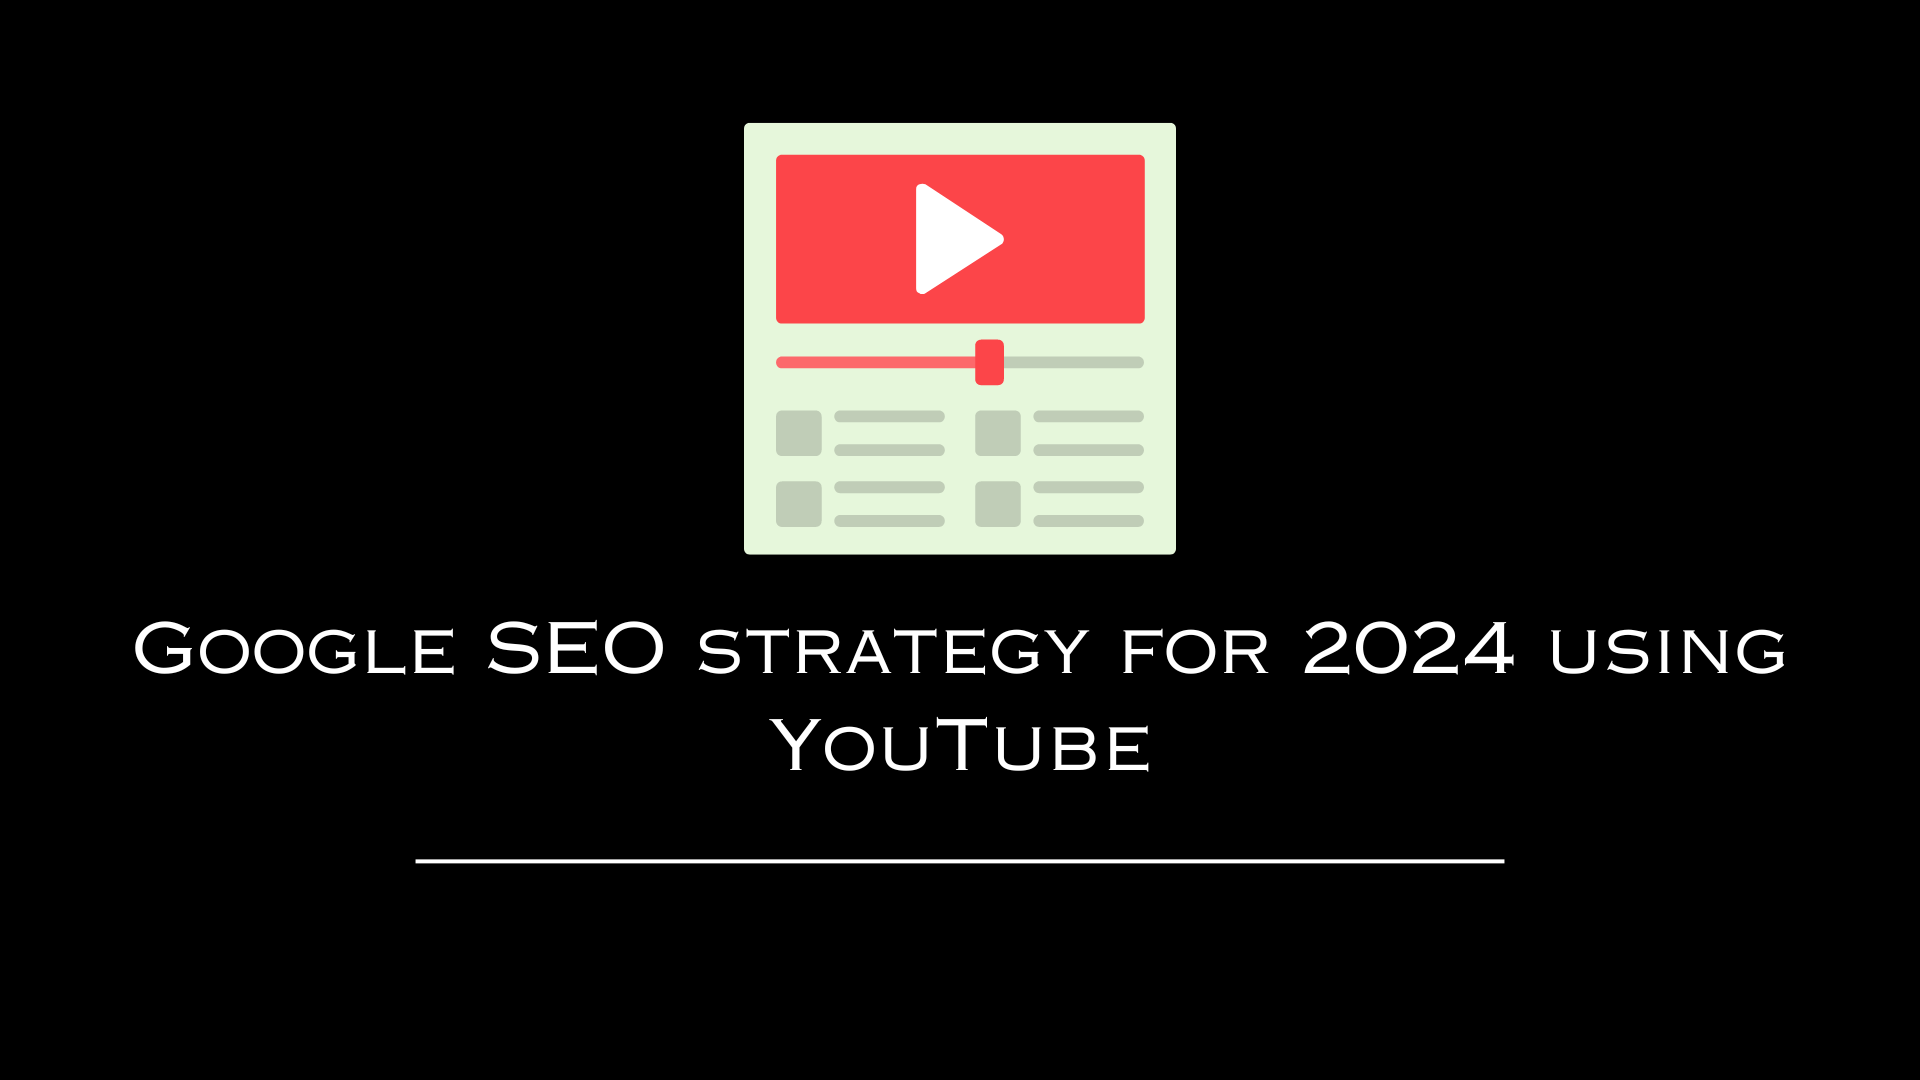 Google SEO strategy for 2024 using YouTube